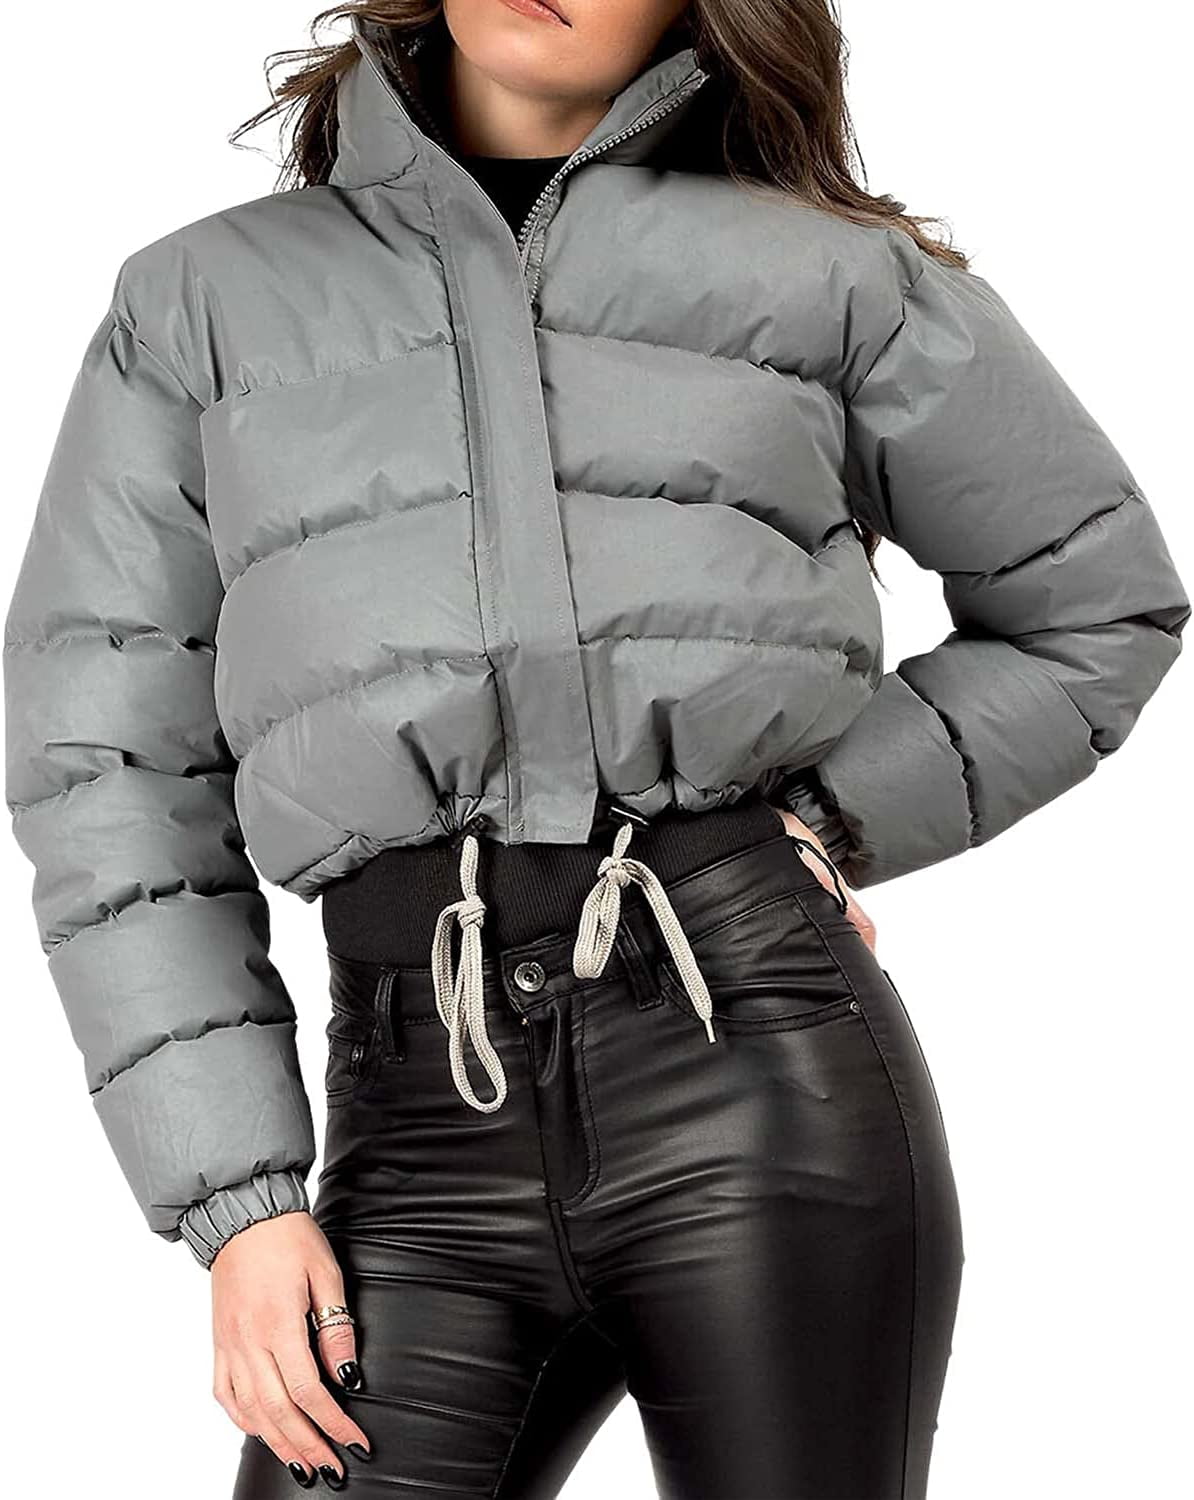  DDAPJ pyju clearance items outlet 90 percent off Women's  Lightweight Puffer Jacket Waterproof Padded Zip up Coats Stand Collar Warm  Quilted Jackets with Pockets : Sports & Outdoors